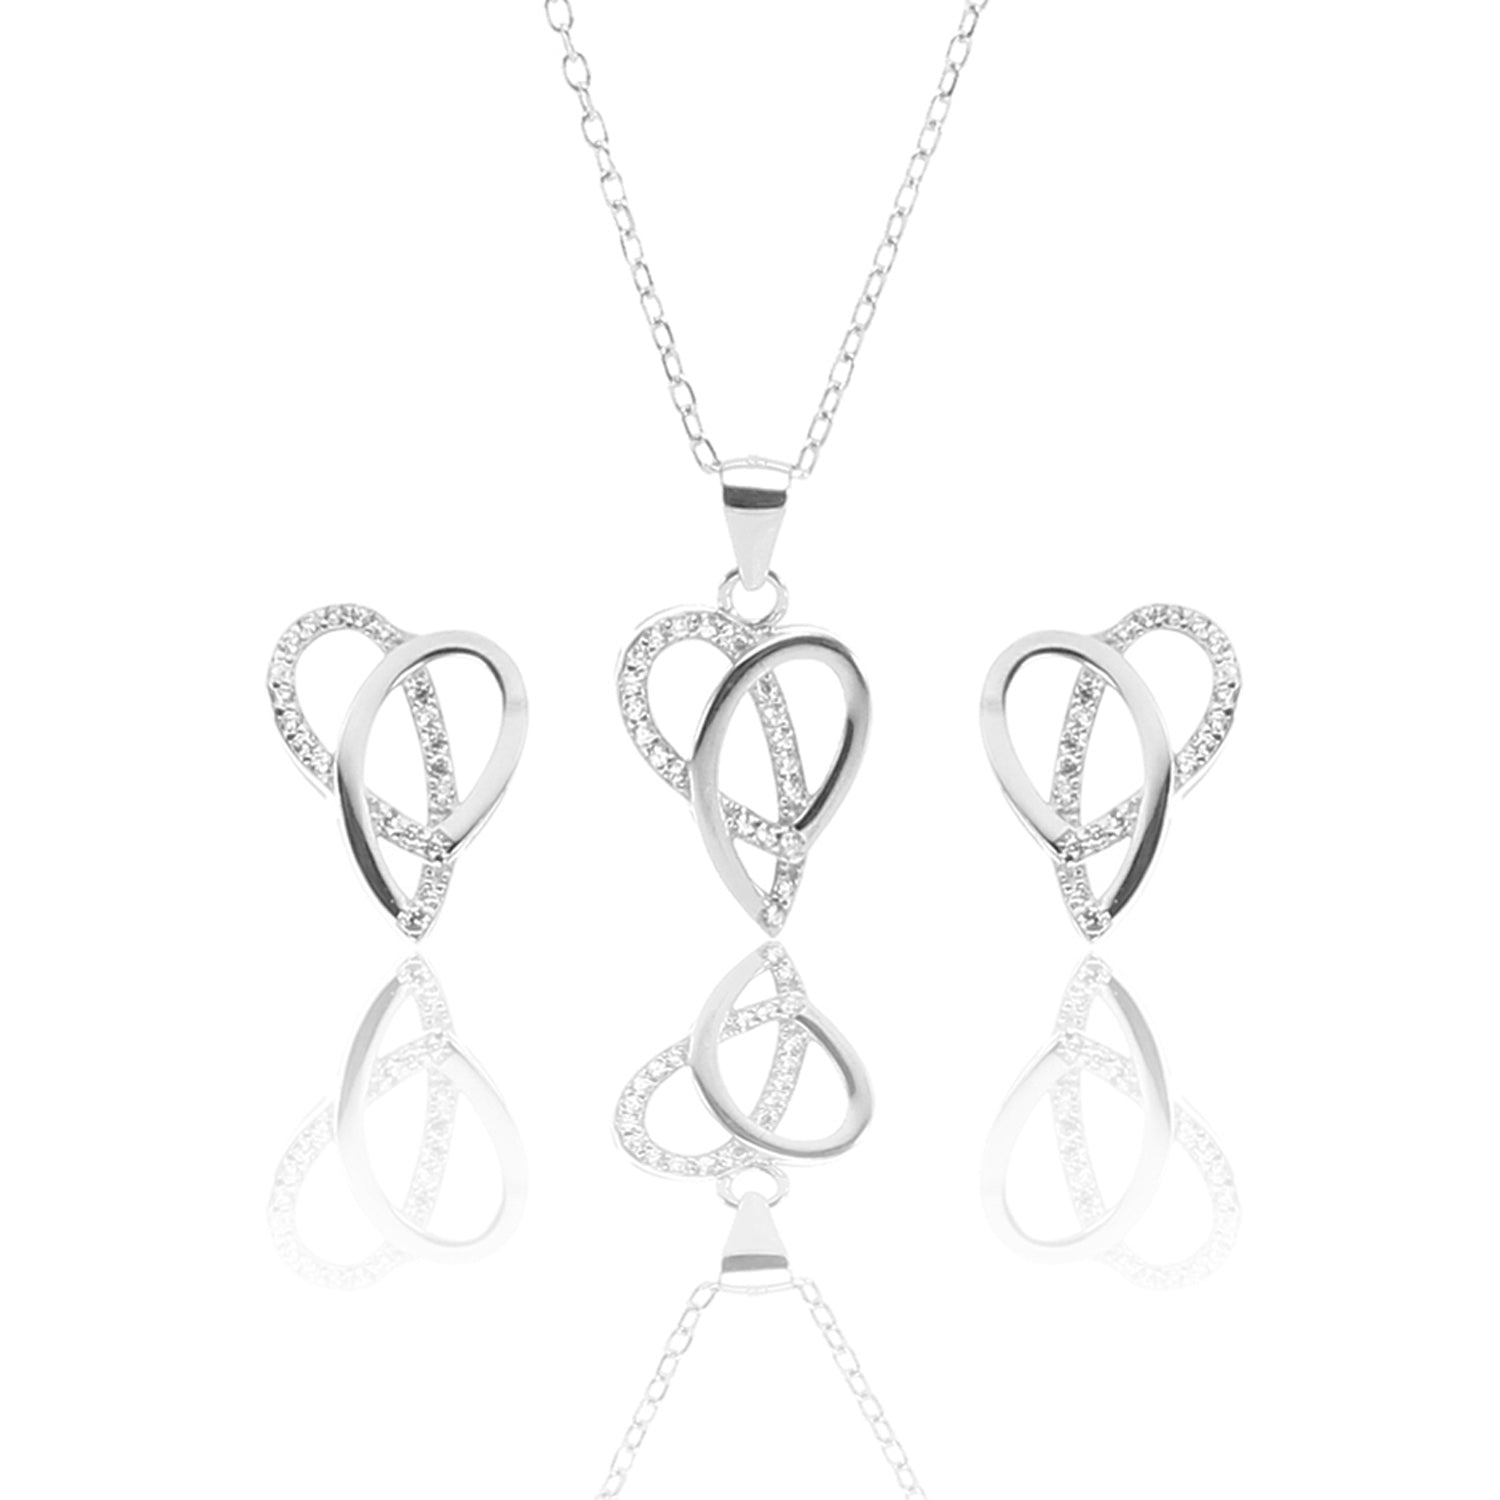 Ribbons of Love Pendant Necklace and Earrings Set - ARJW1007RD ARCADIO